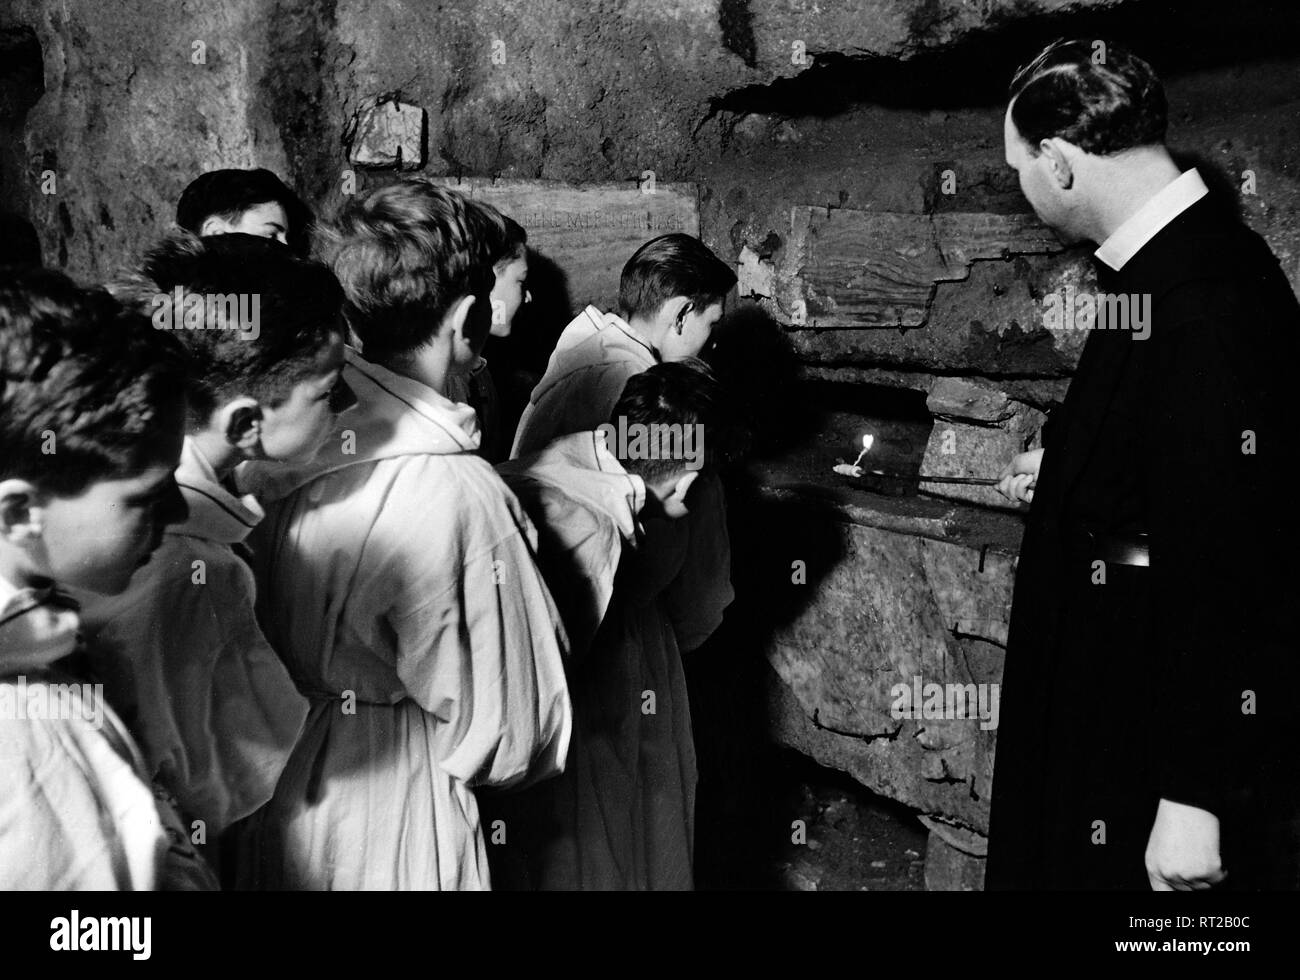 Travel to Rome - Italy in 1950s - Swiss choirboys visits the Domtilla Catacombs in Rome. Schweizer Chorknaben in den Katakomben der Domitilla in Rom, Italien. Image taken in 1954 by Erich Andres. Stock Photo